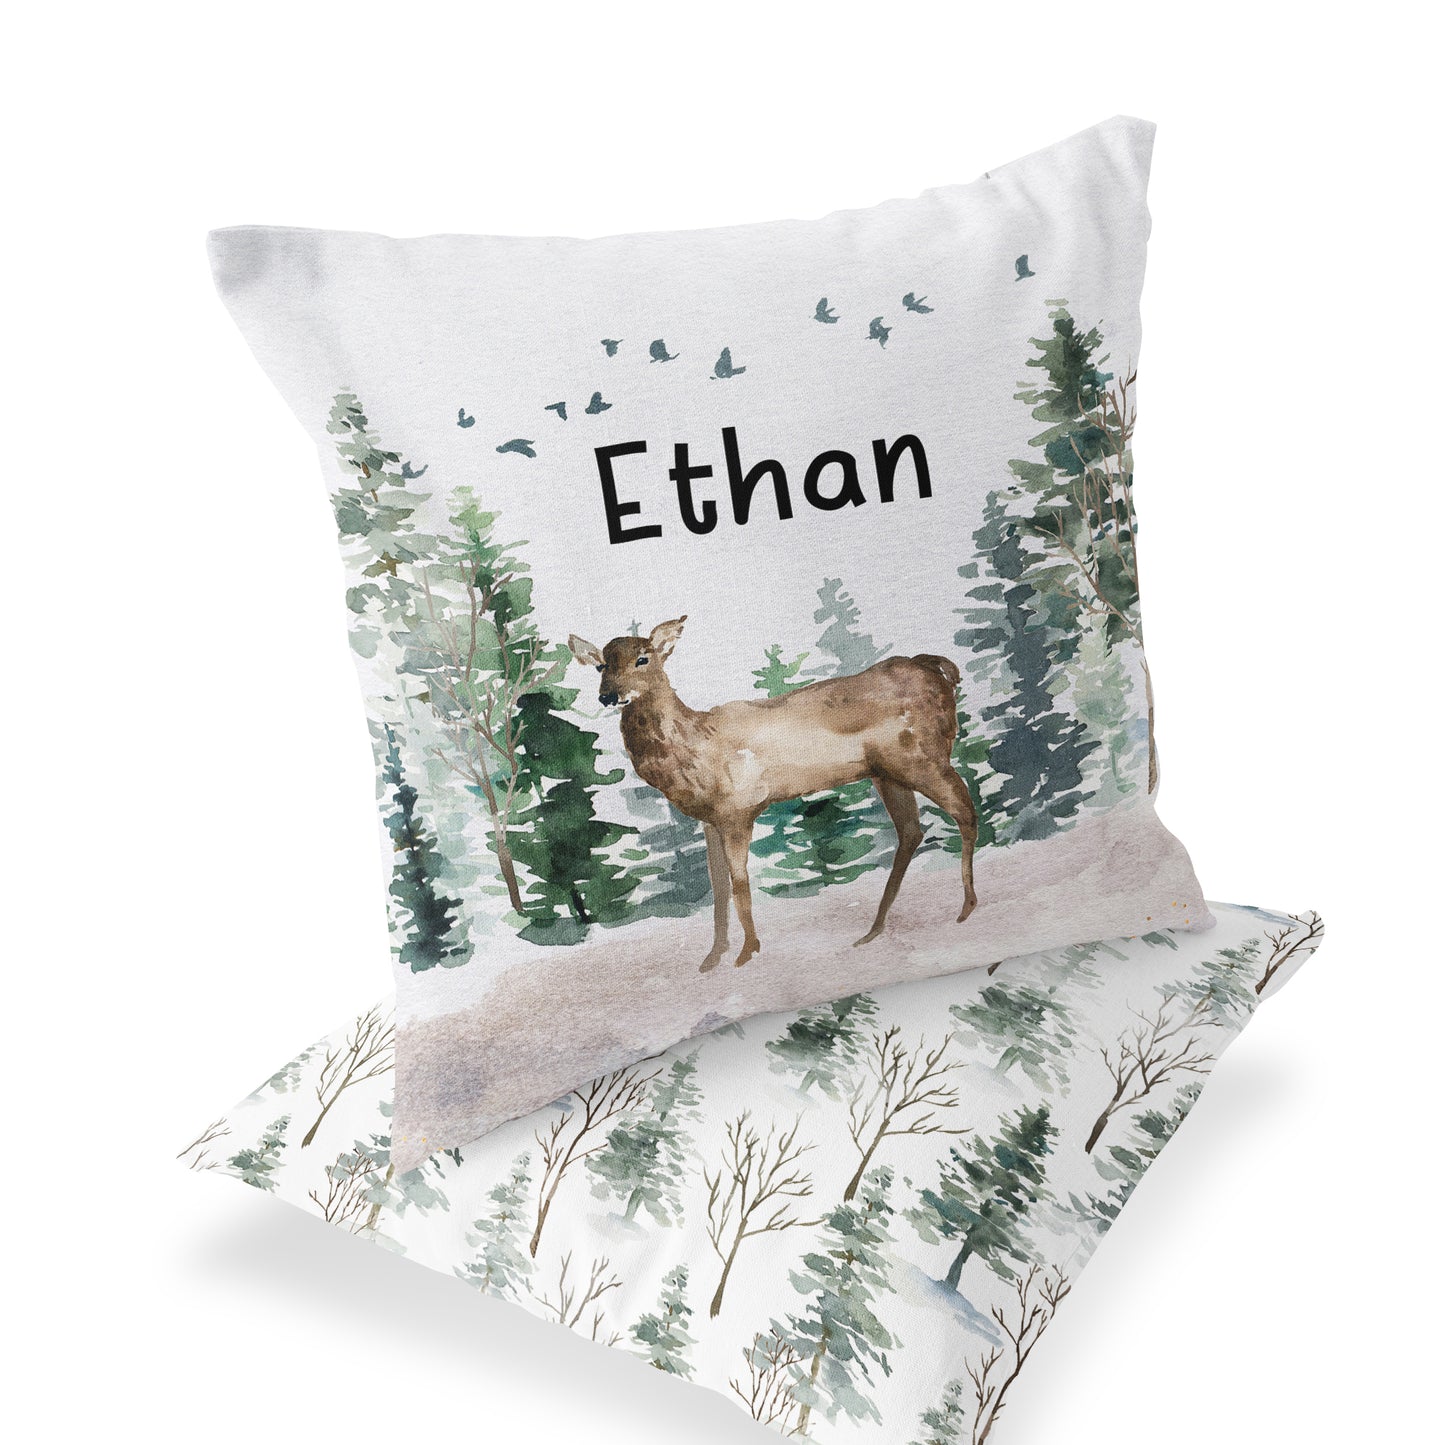 Doe Personalized Pillow, Woodland Nursery Decor - Enchanted Forest